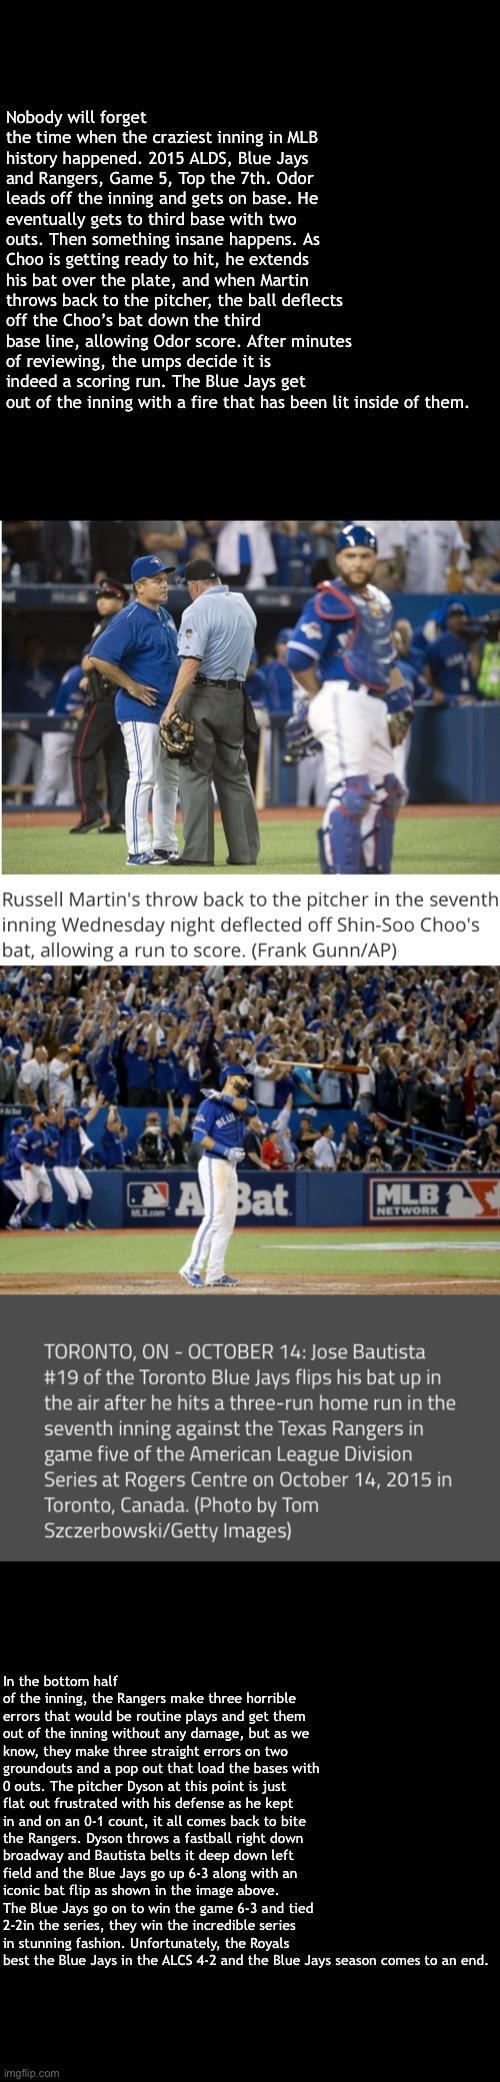 Nobody will forget the time when the craziest inning in MLB history happened. 2015 ALDS, Blue Jays and Rangers, Game 5, Top the 7th. Odor leads off the inning and gets on base. He eventually gets to third base with two outs. Then something insane happens. As Choo is getting ready to hit, he extends his bat over the plate, and when Martin throws back to the pitcher, the ball deflects off the Choo’s bat down the third base line, allowing Odor score. After minutes of reviewing, the umps decide it is indeed a scoring run. The Blue Jays get out of the inning with a fire that has been lit inside of them. In the bottom half of the inning, the Rangers make three horrible errors that would be routine plays and get them out of the inning without any damage, but as we know, they make three straight errors on two groundouts and a pop out that load the bases with 0 outs. The pitcher Dyson at this point is just flat out frustrated with his defense as he kept in and on an 0-1 count, it all comes back to bite the Rangers. Dyson throws a fastball right down broadway and Bautista belts it deep down left field and the Blue Jays go up 6-3 along with an iconic bat flip as shown in the image above. The Blue Jays go on to win the game 6-3 and tied 2-2in the series, they win the incredible series in stunning fashion. Unfortunately, the Royals best the Blue Jays in the ALCS 4-2 and the Blue Jays season comes to an end. | image tagged in baseball | made w/ Imgflip meme maker